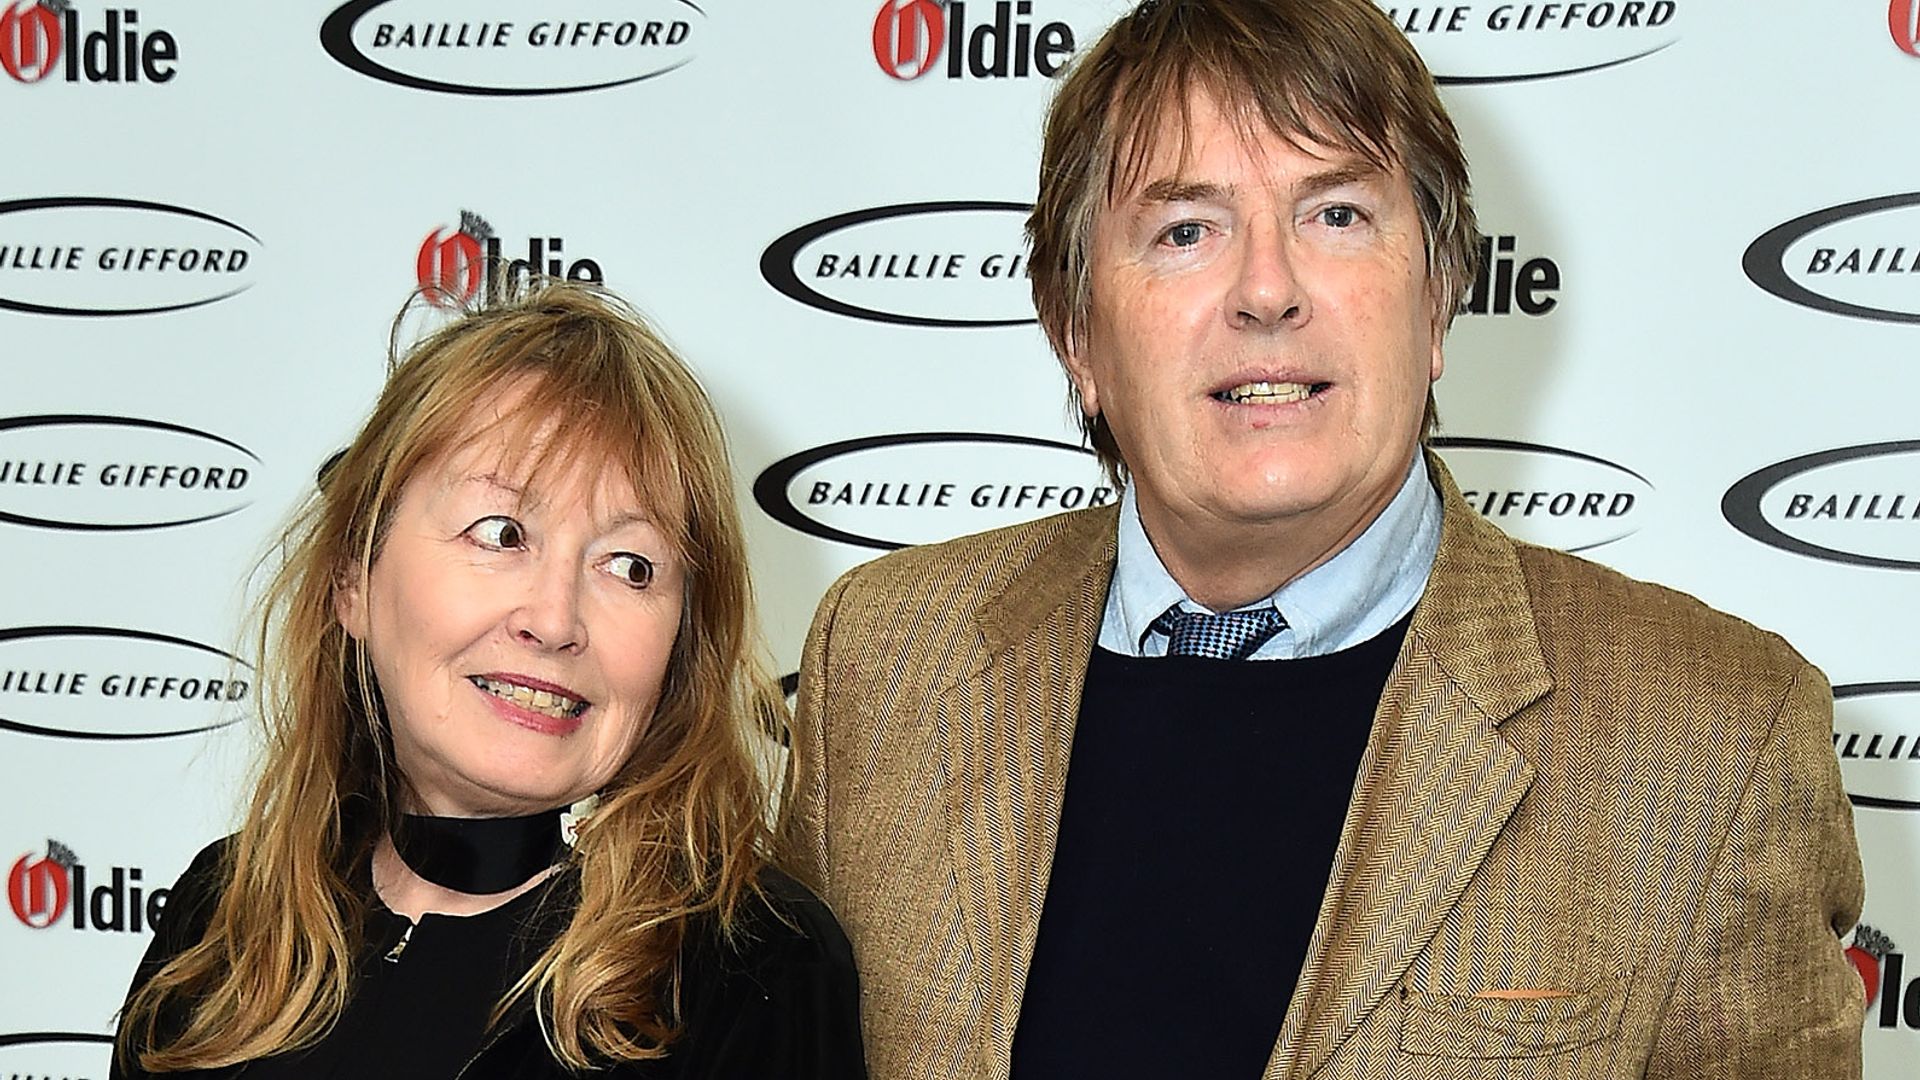 Giles Wood in a brown suit jacket and Mary Killen in a floral dress